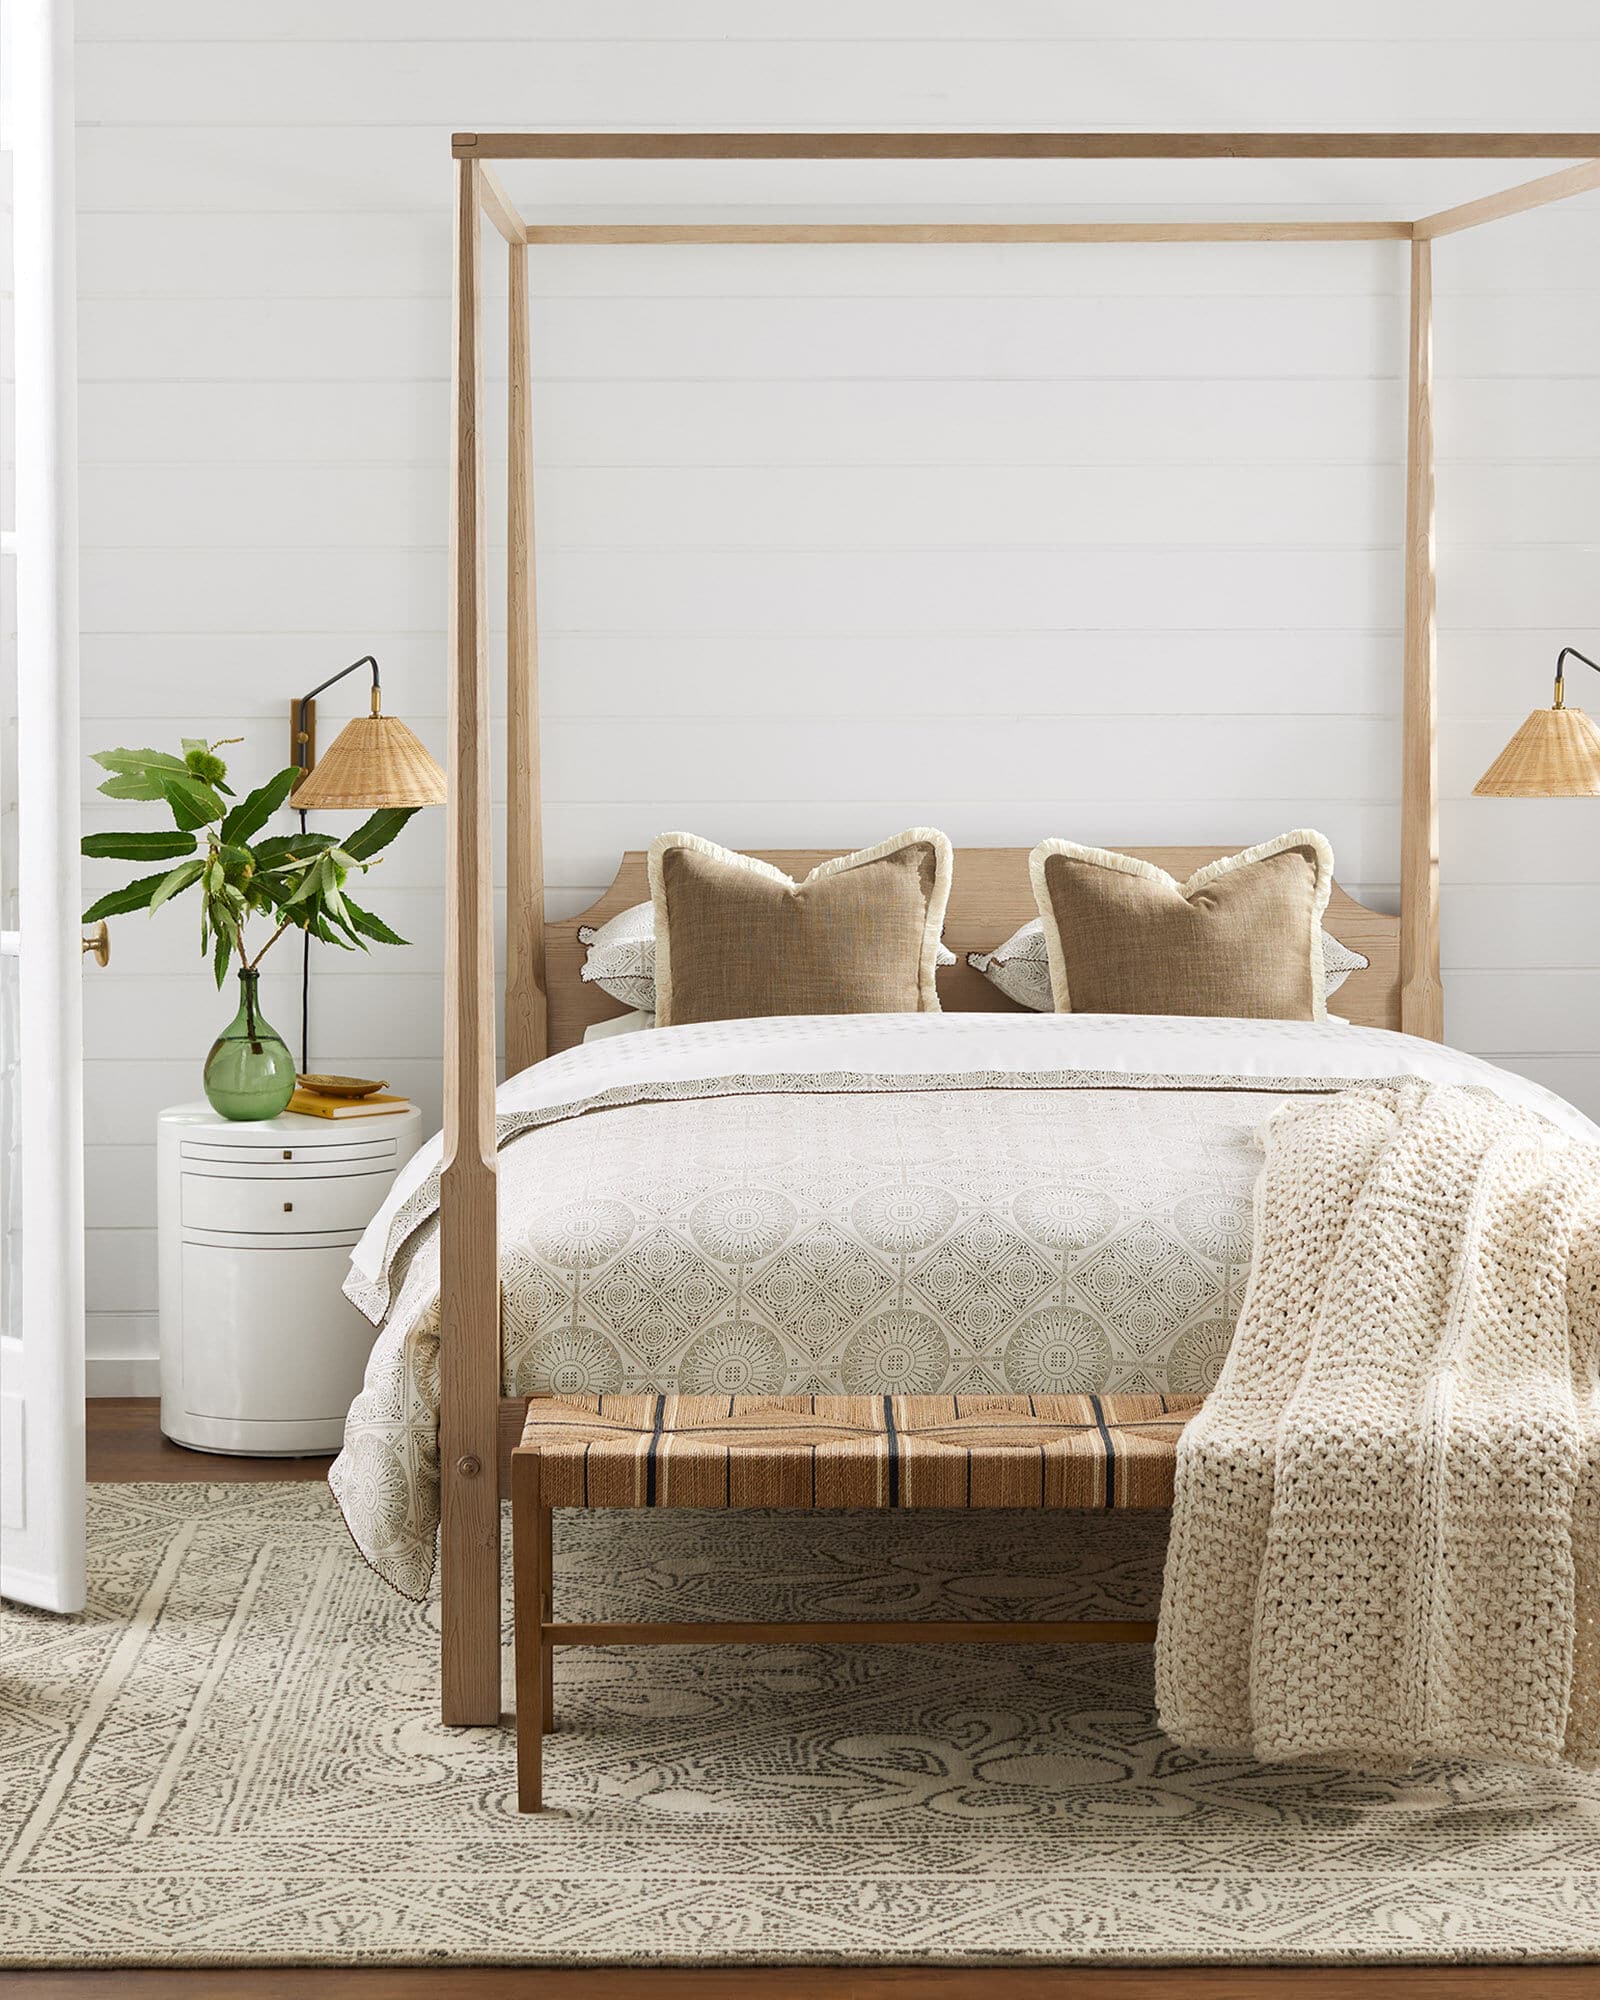 Serena & Lily Whitaker Four Poster Bed | Sunbleached Pine